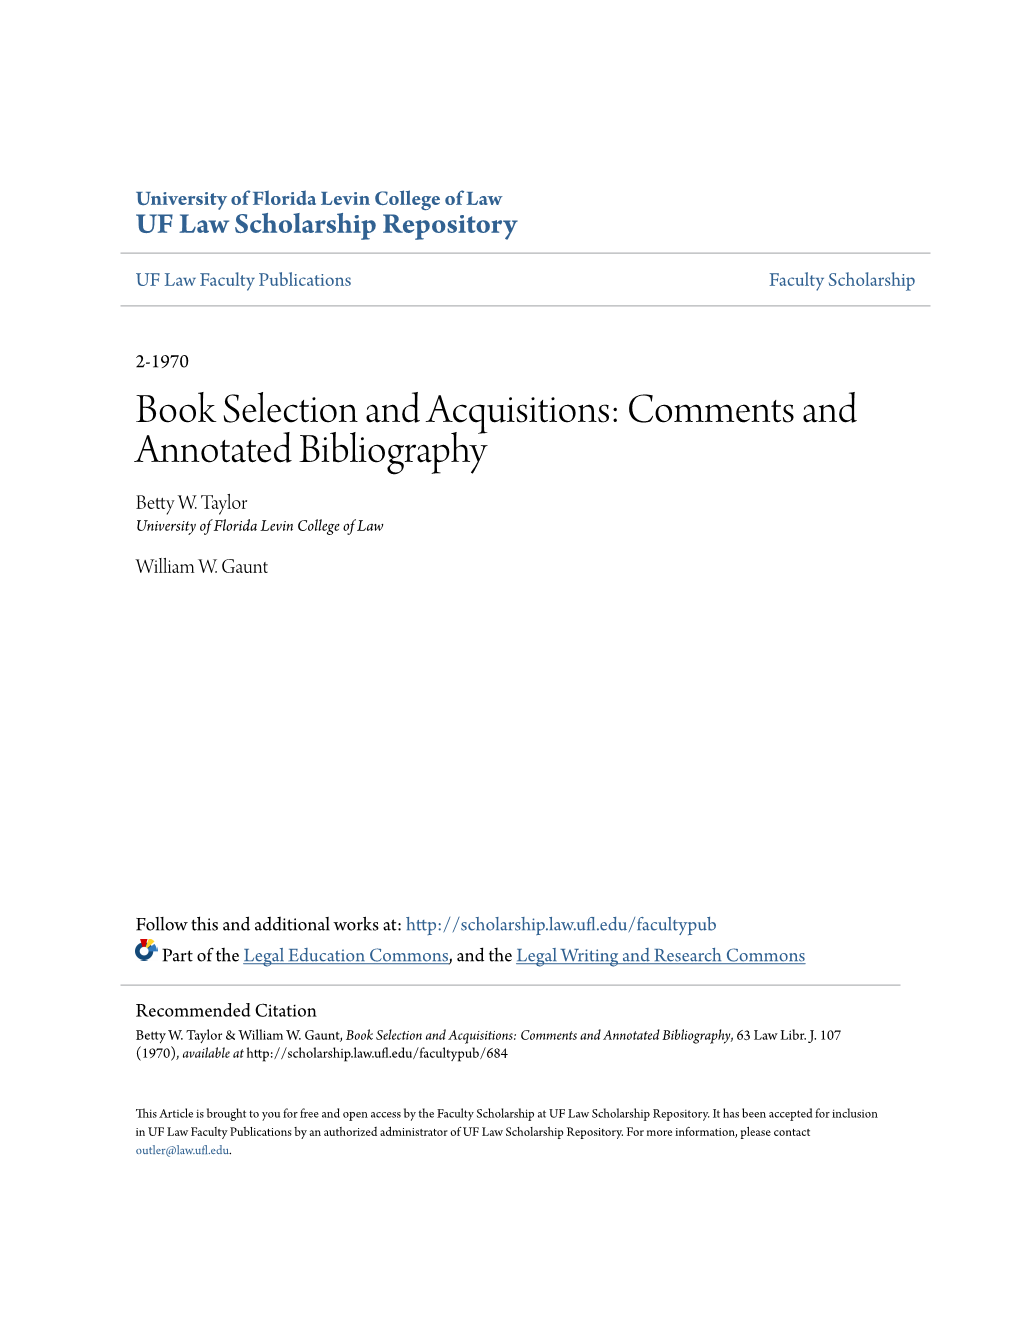 Book Selection and Acquisitions: Comments and Annotated Bibliography Betty W